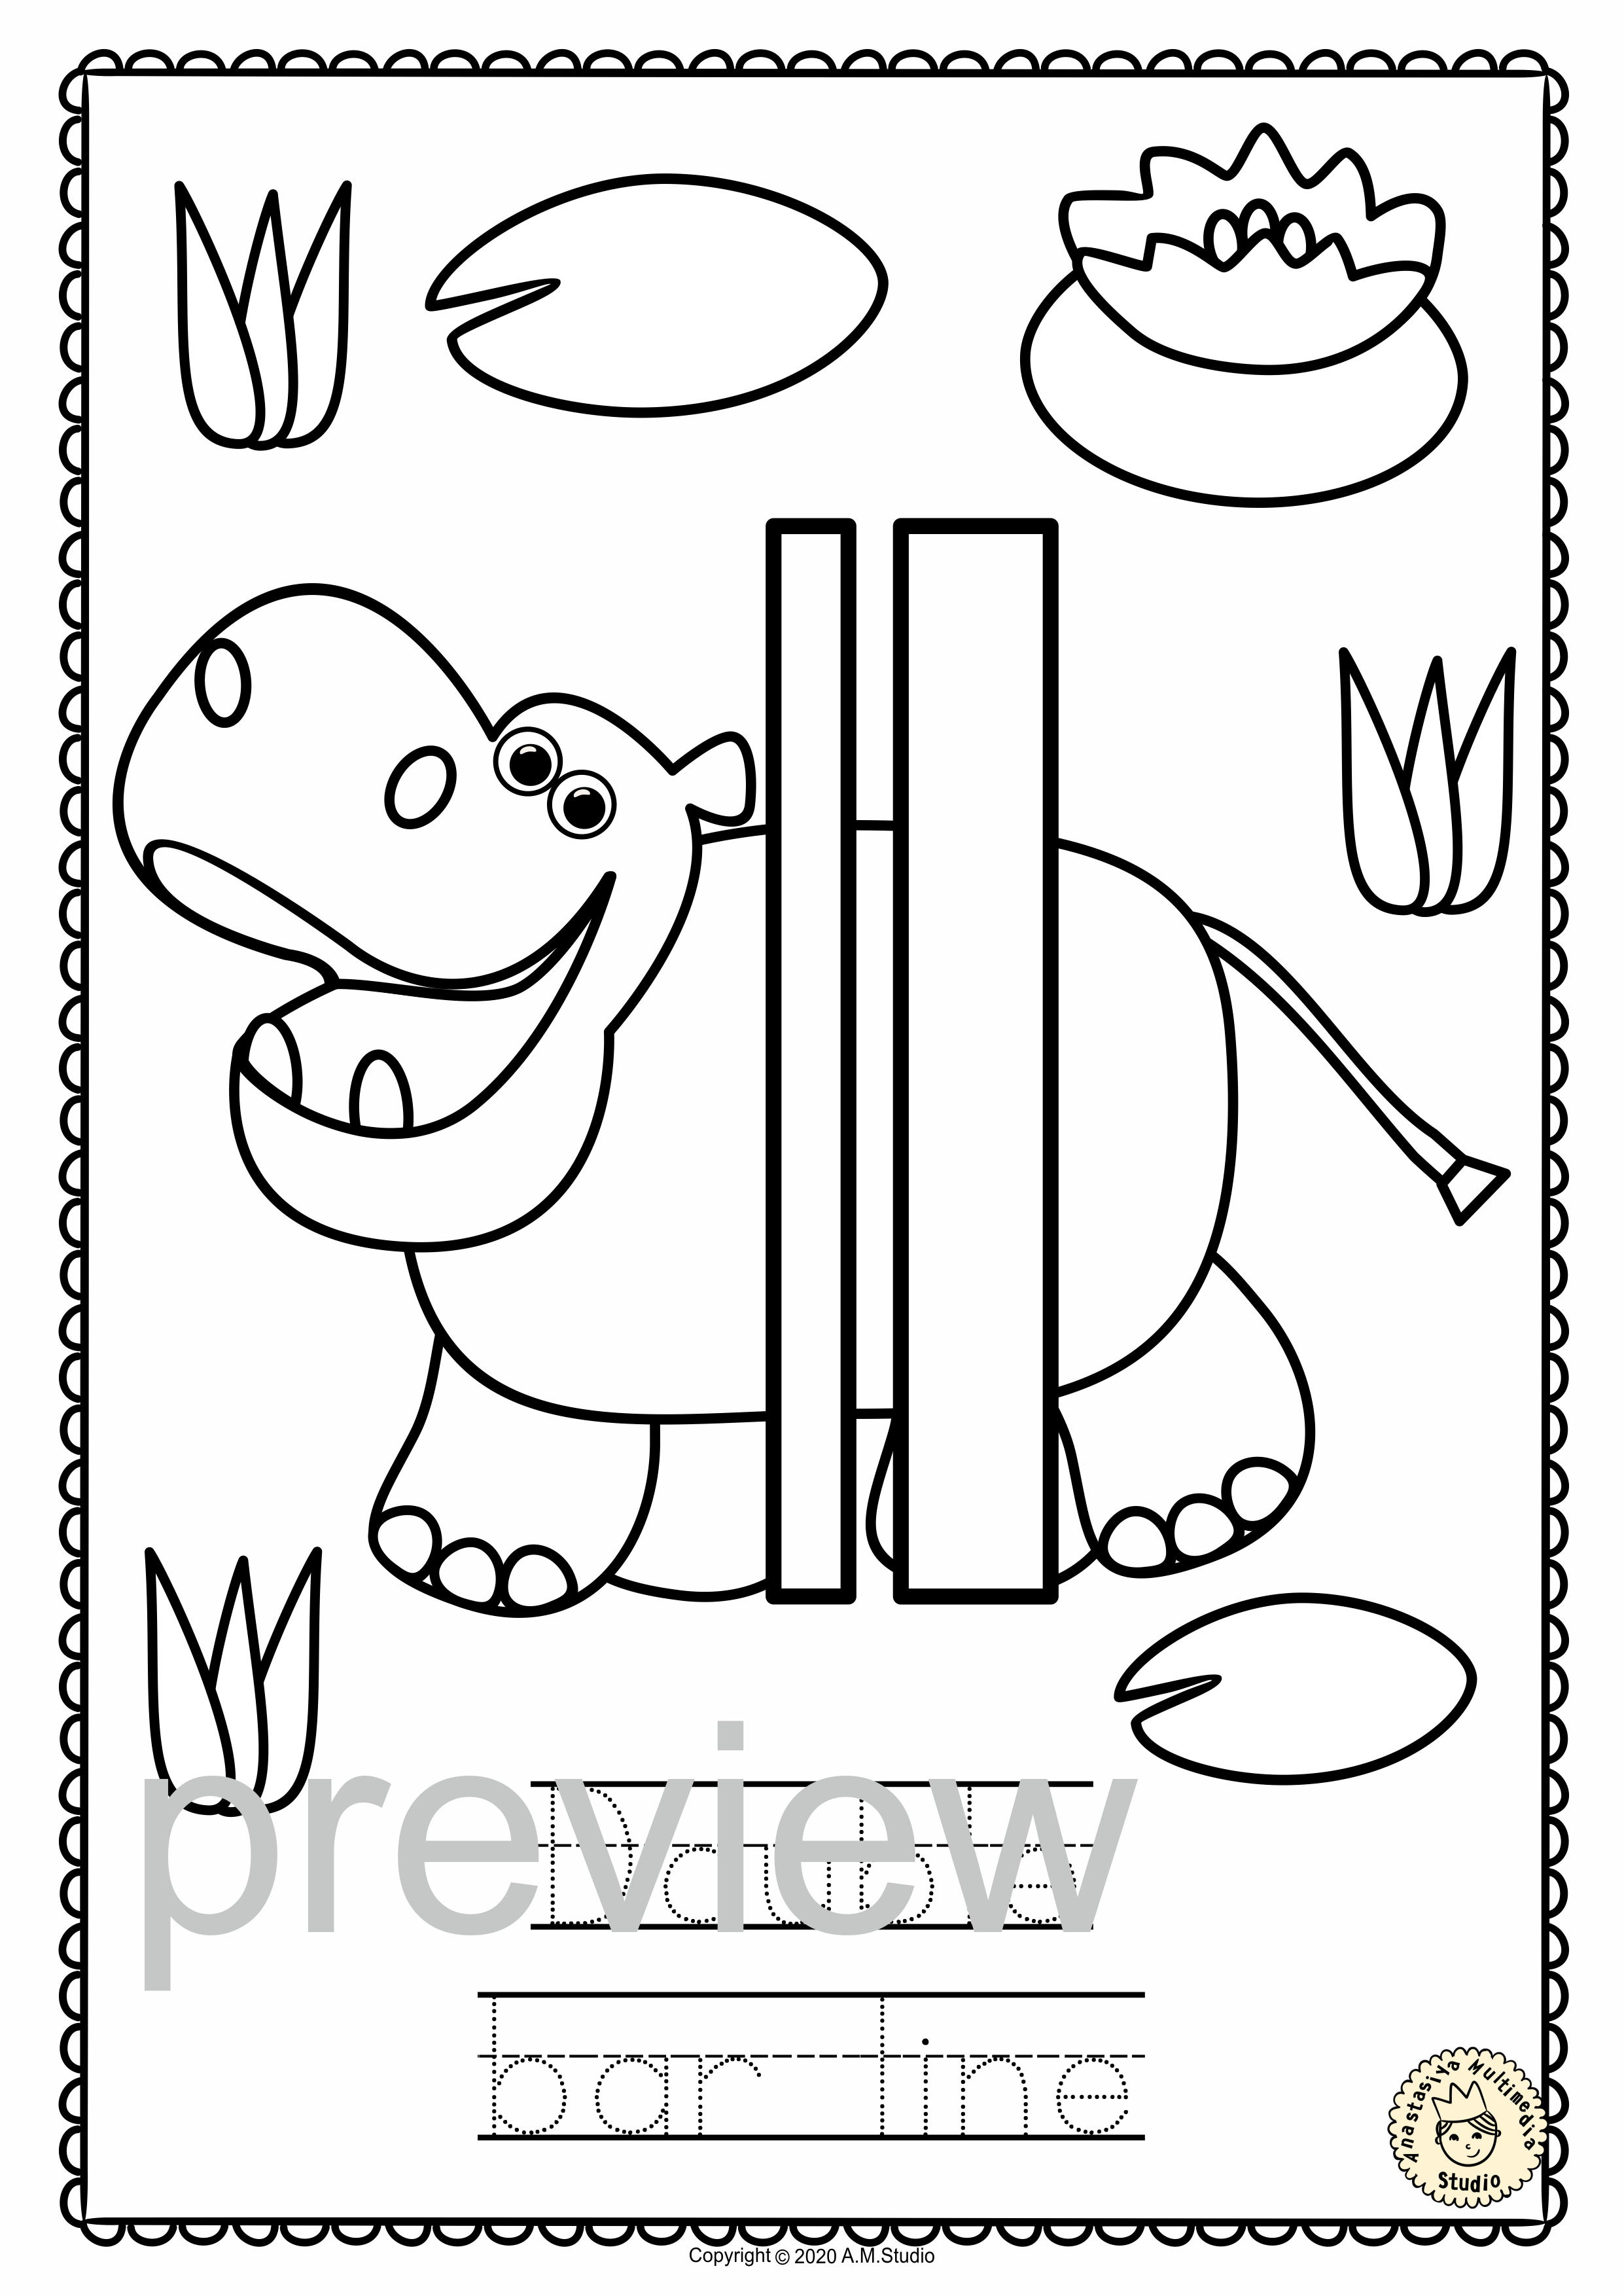 Music Classroom Decor Posters for Coloring set #2 {Animal Themed} (img # 4)